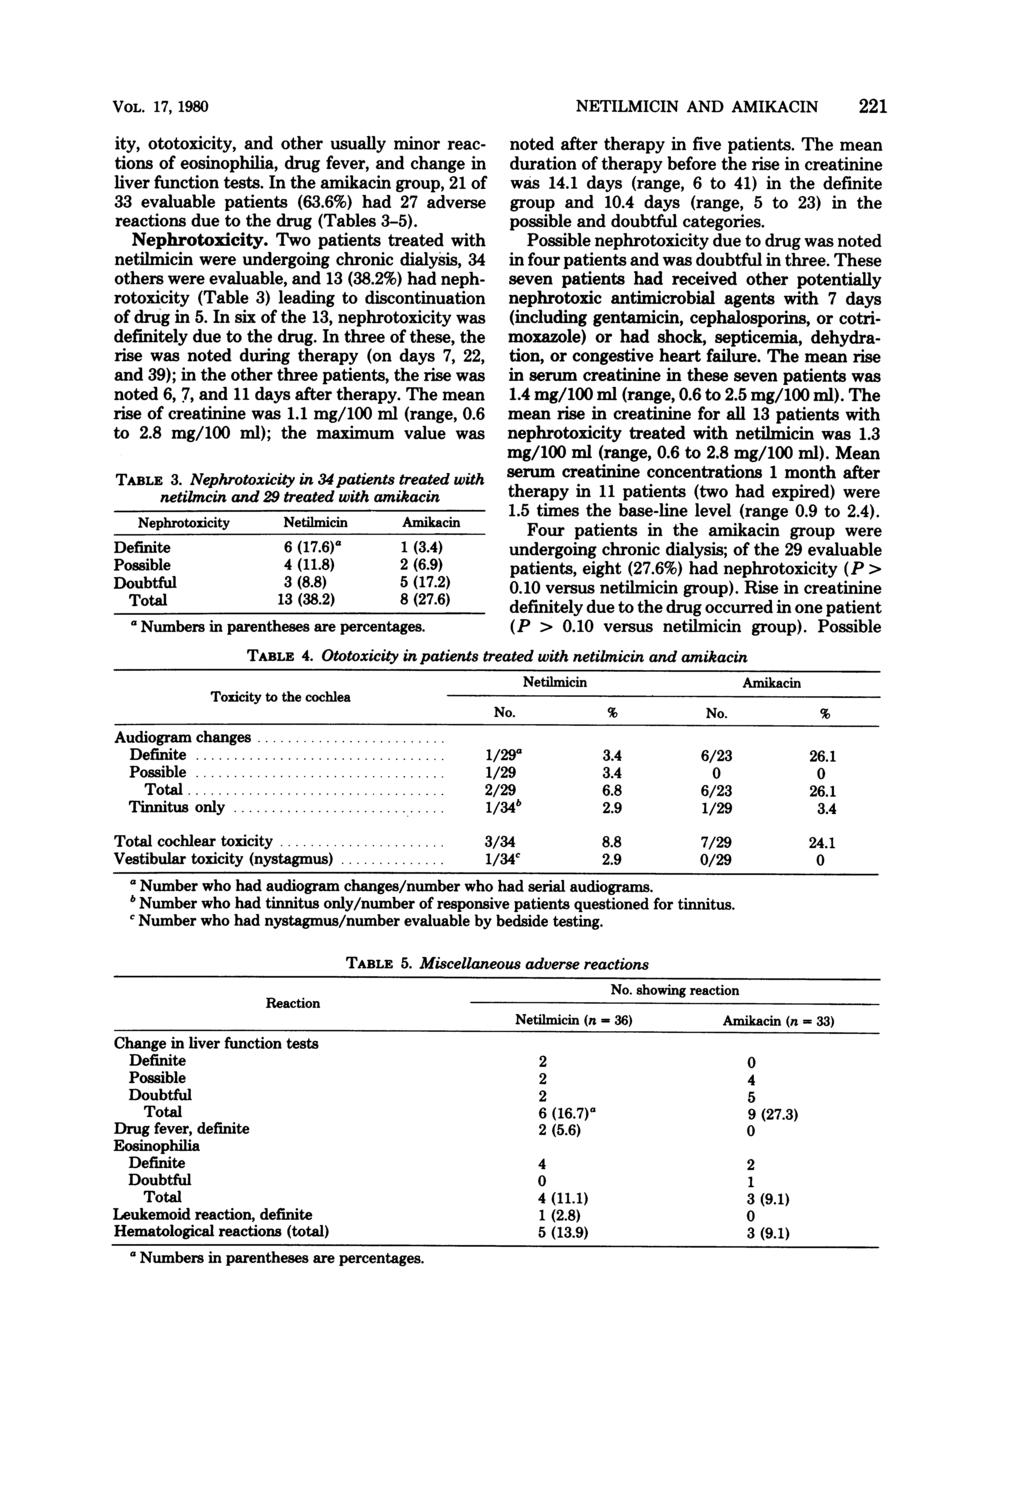 VOL. 17, 1980 ity, ototoxicity, and other usually minor reactions of eosinophilia, drug fever, and change in liver function tests. In the amikacin group, 21 of 33 evaluable patients (63.